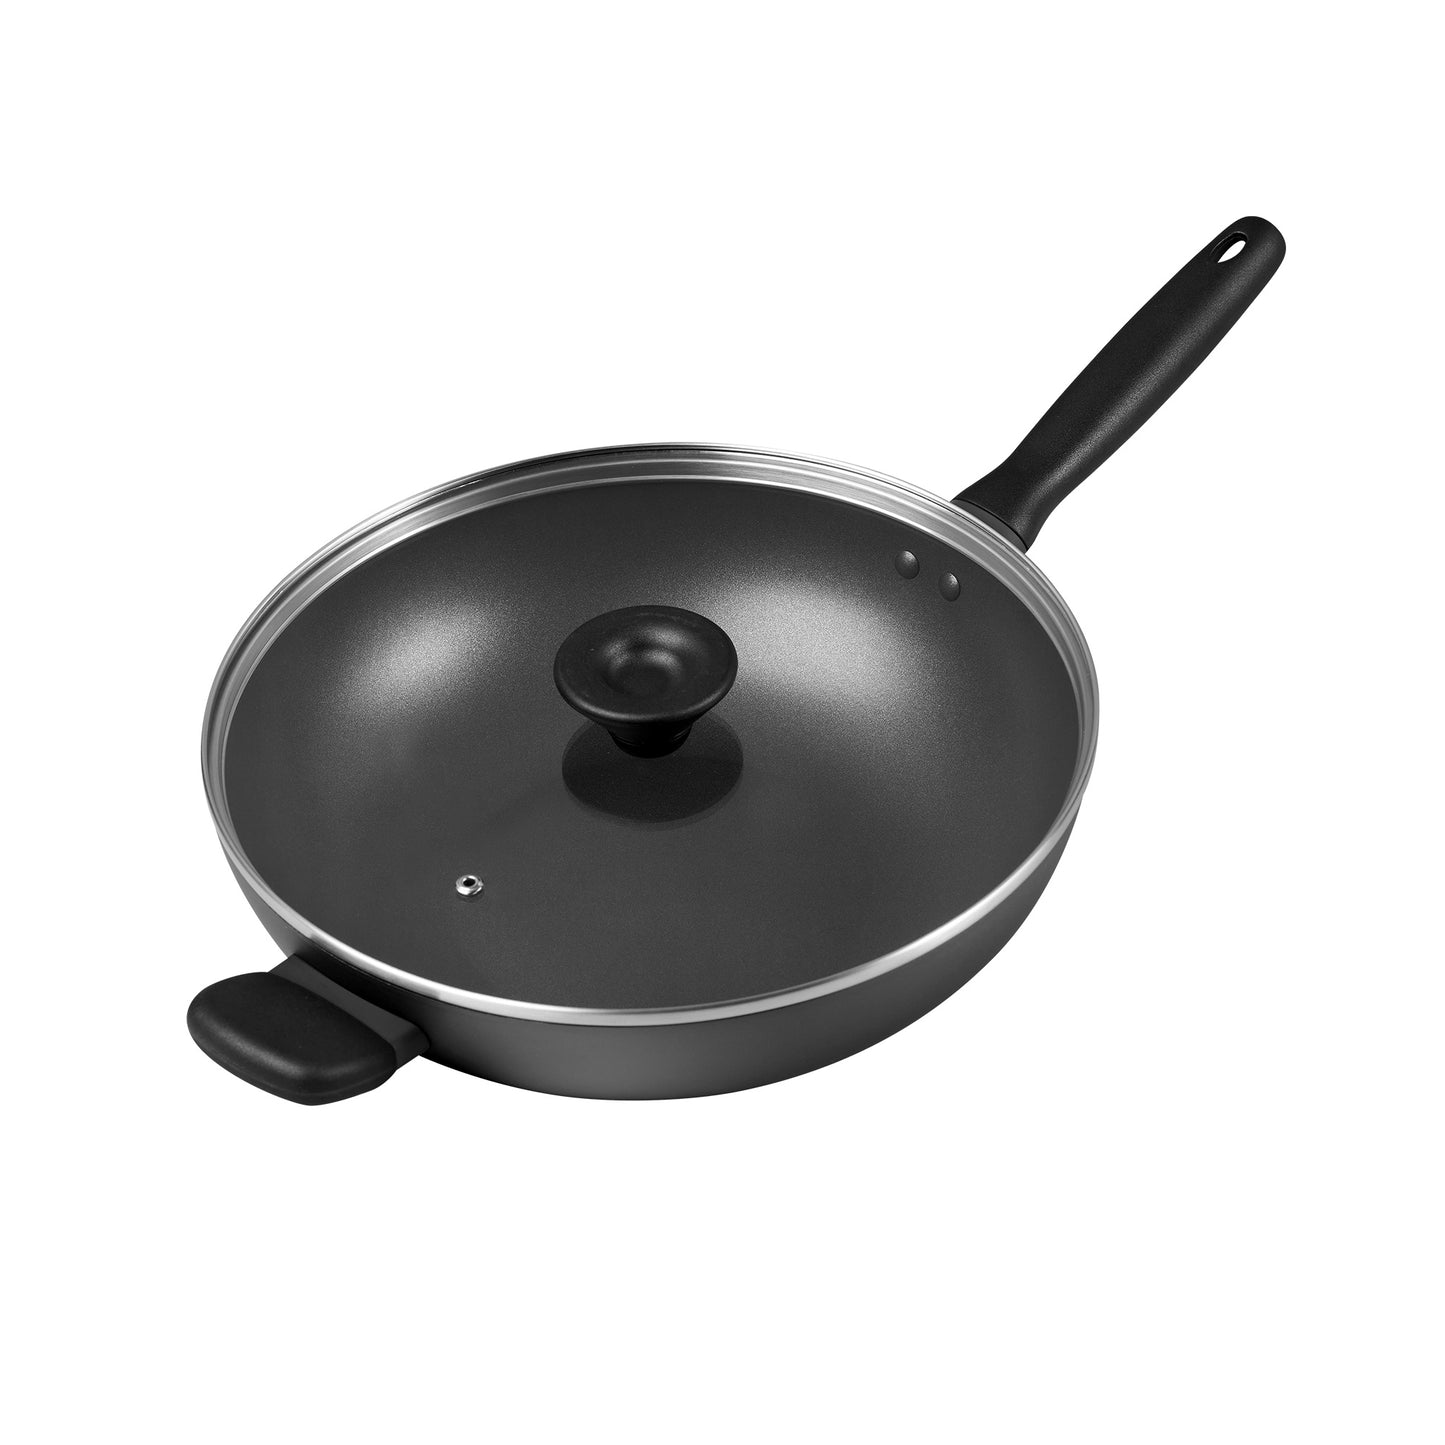 Meyer Bauhaus Series Nonstick Induction Stirfry with Glass Lid 30cm